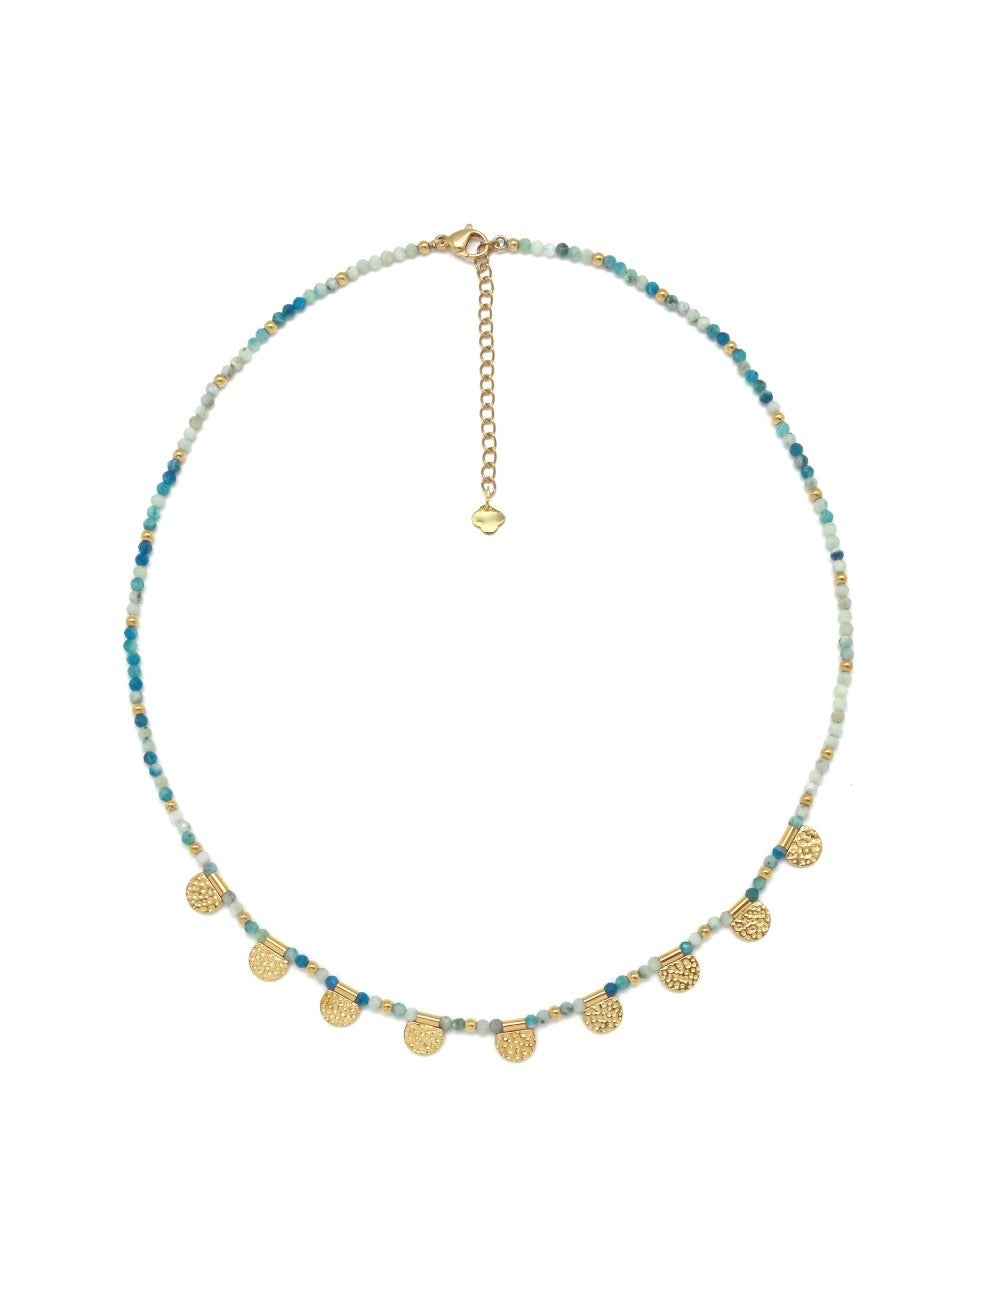 Faceted Agate Short Necklace with 24K Gold Plate N2-2352 -French Flair Collection-